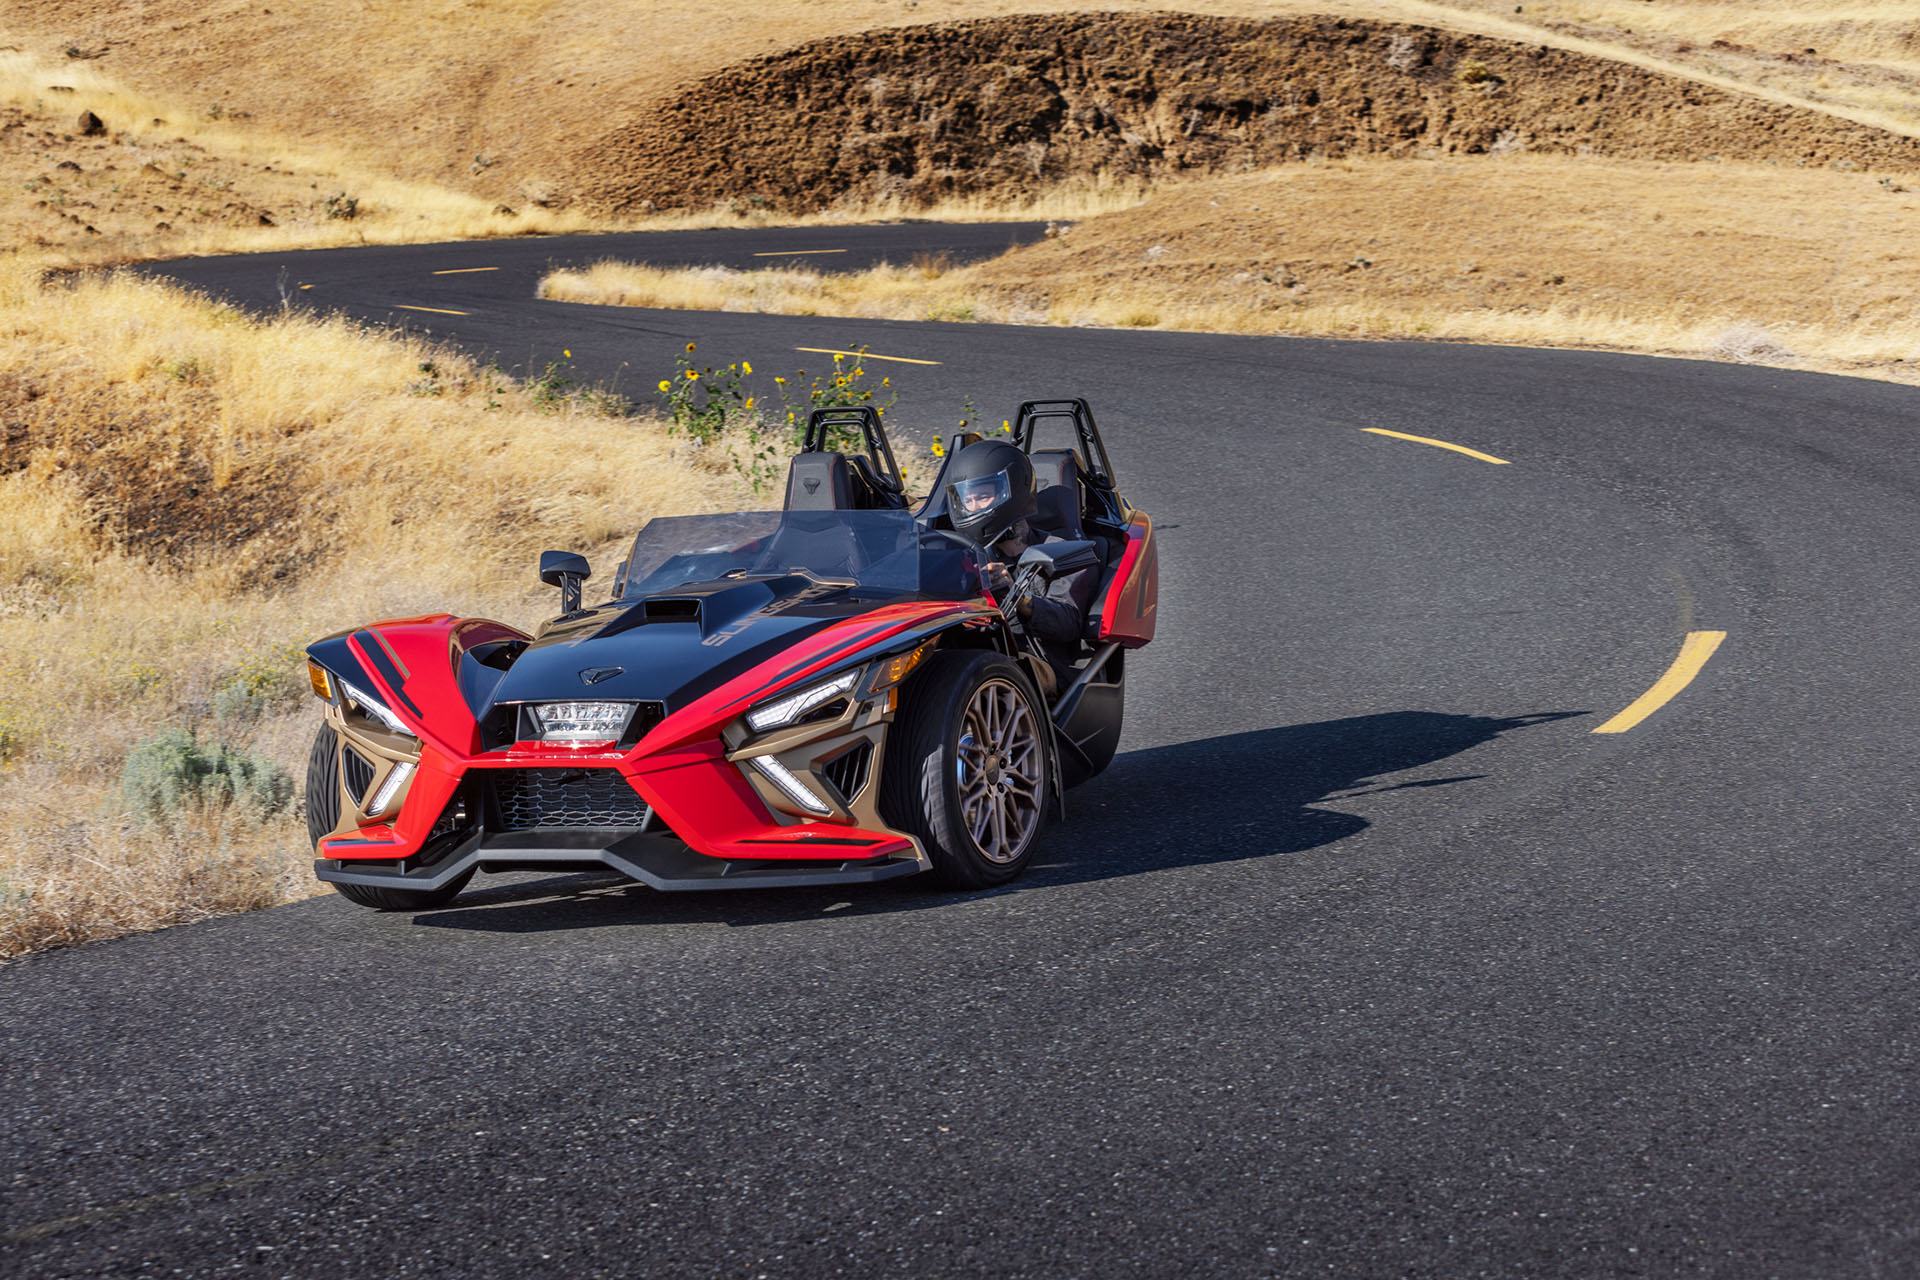 2022 Slingshot Signature Limited Edition in Loxley, Alabama - Photo 5